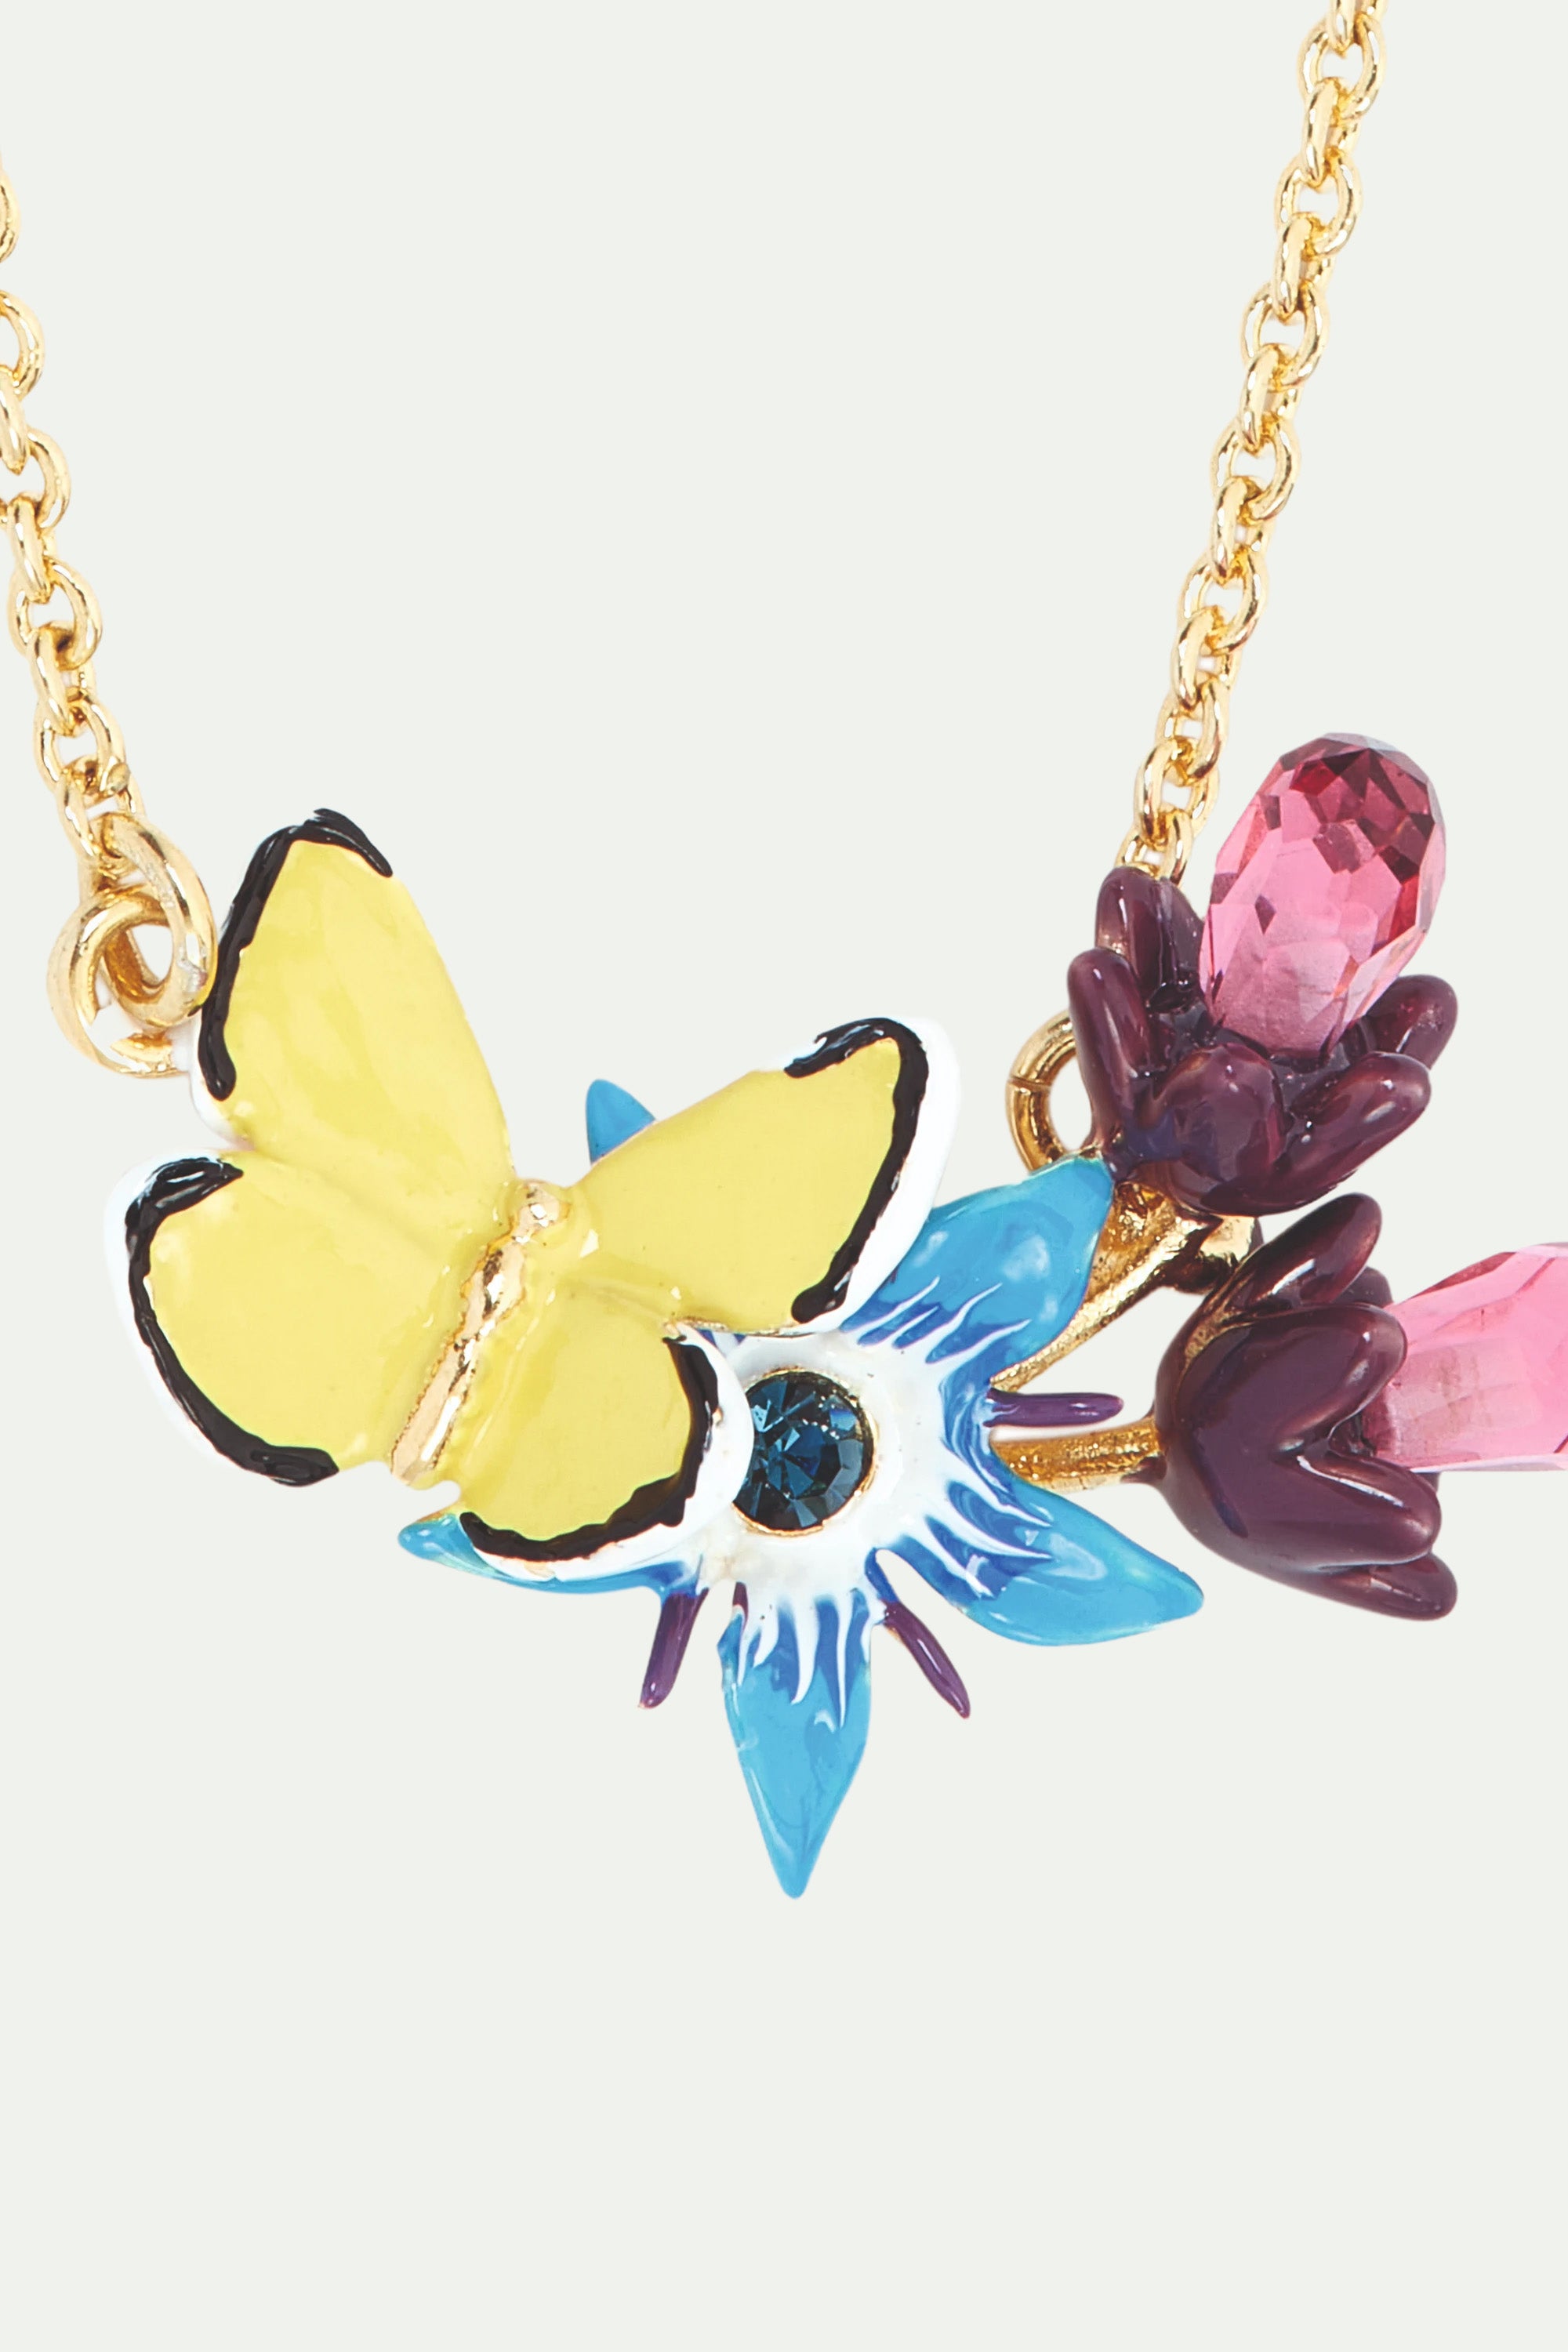 Blue flower and yellow butterfly pendant necklace